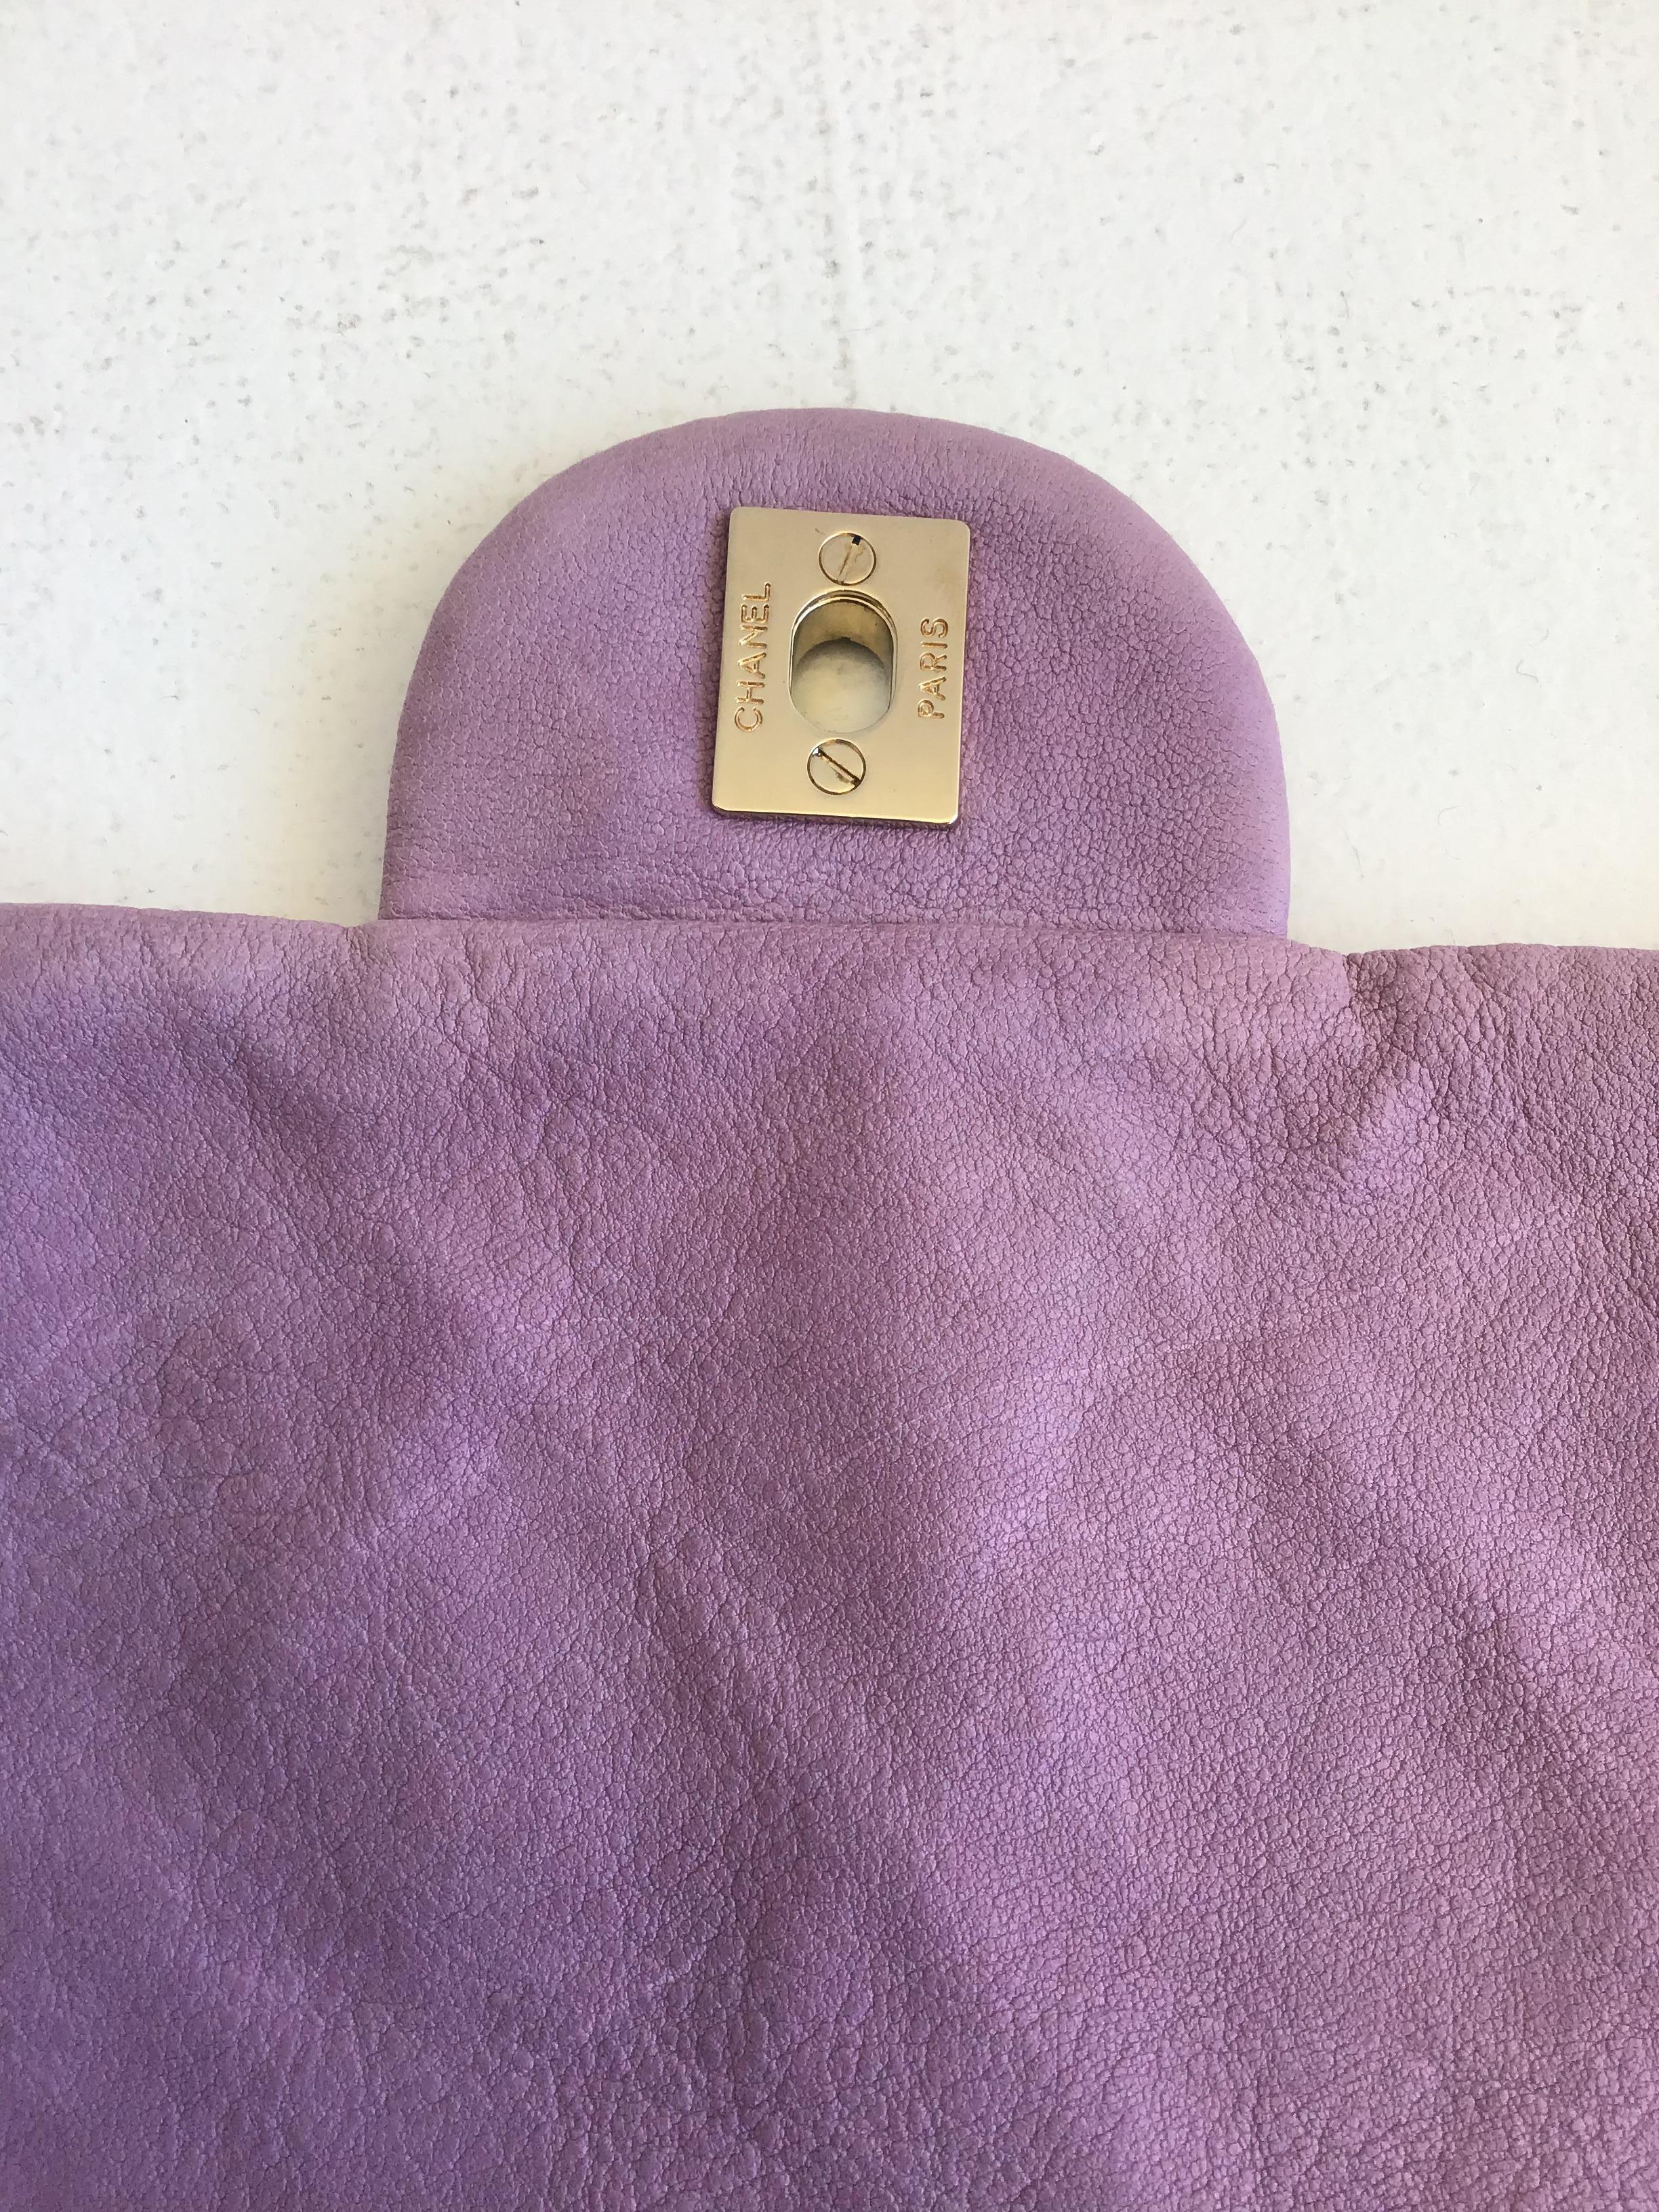 Chanel Lavender Flap Purse with Gold Hardware, Size Medium 1